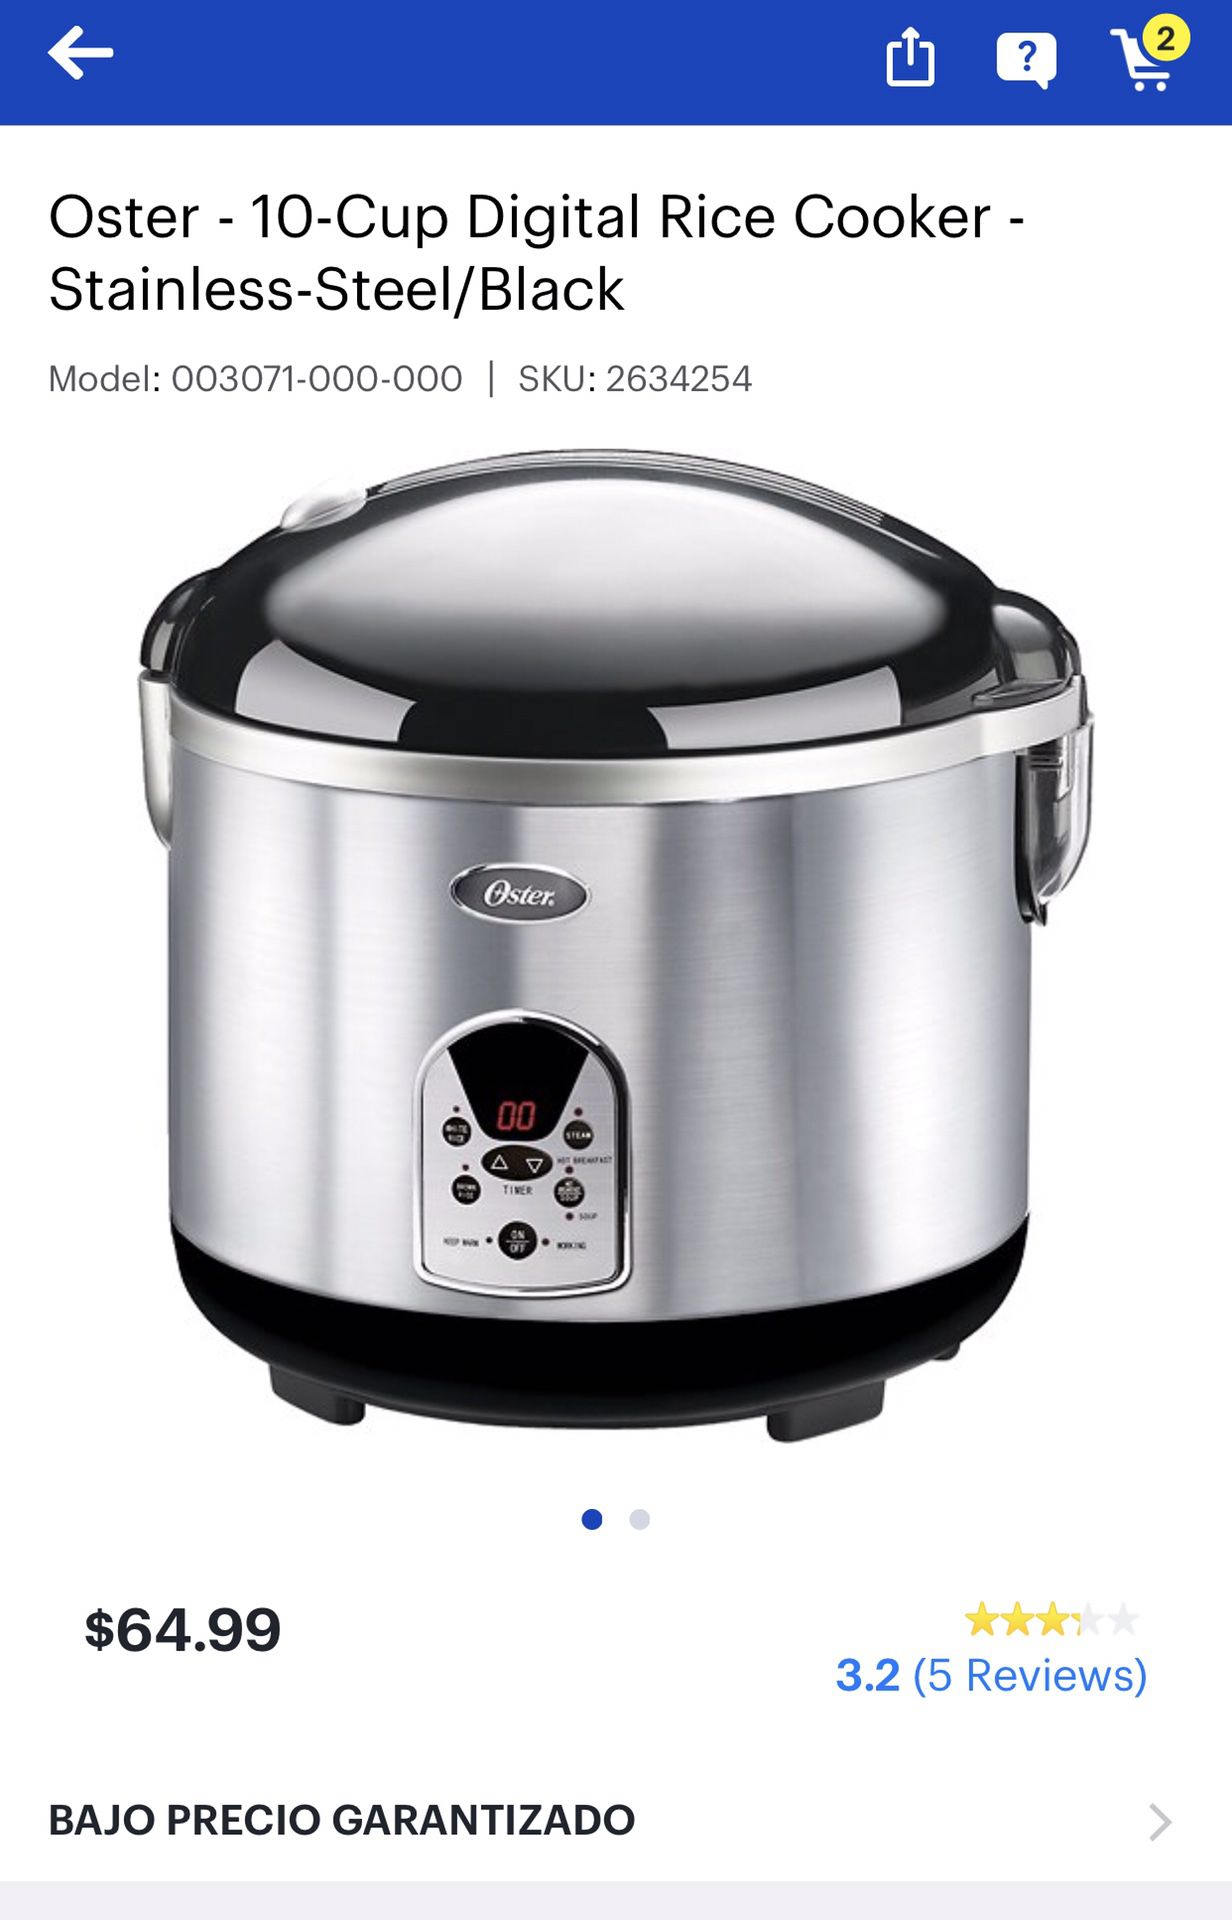 Oster Rice Cooker In A Very Good Condition for Sale in Humble, TX